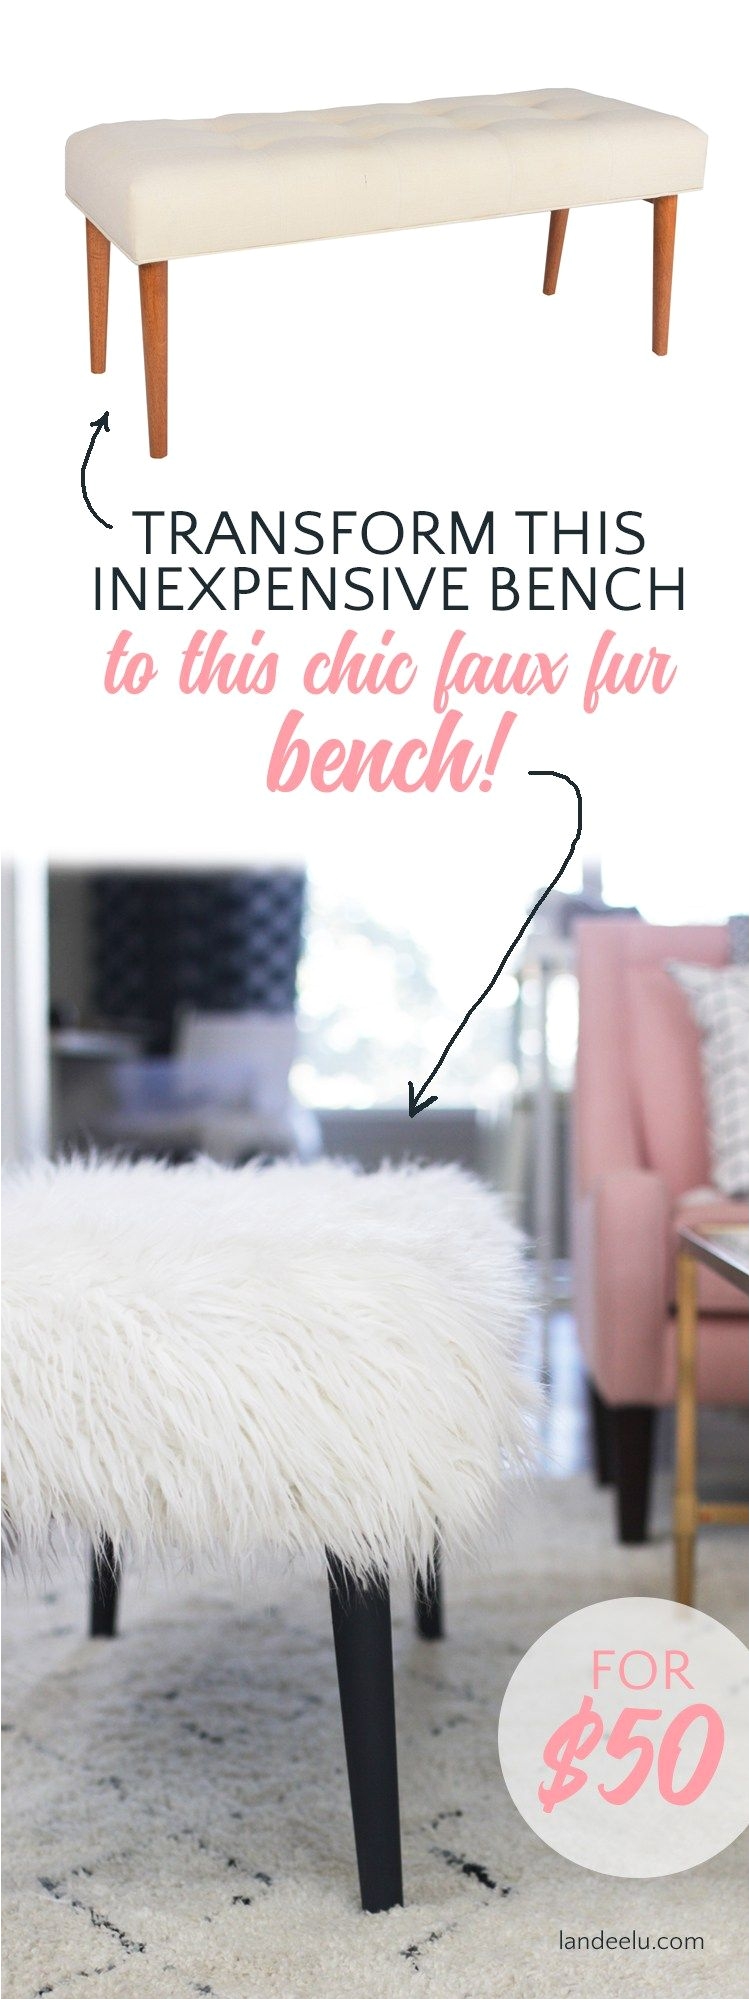 easily transform an inexpensive upholstered bench into a chic faux fur bench with this diy bench tutorial